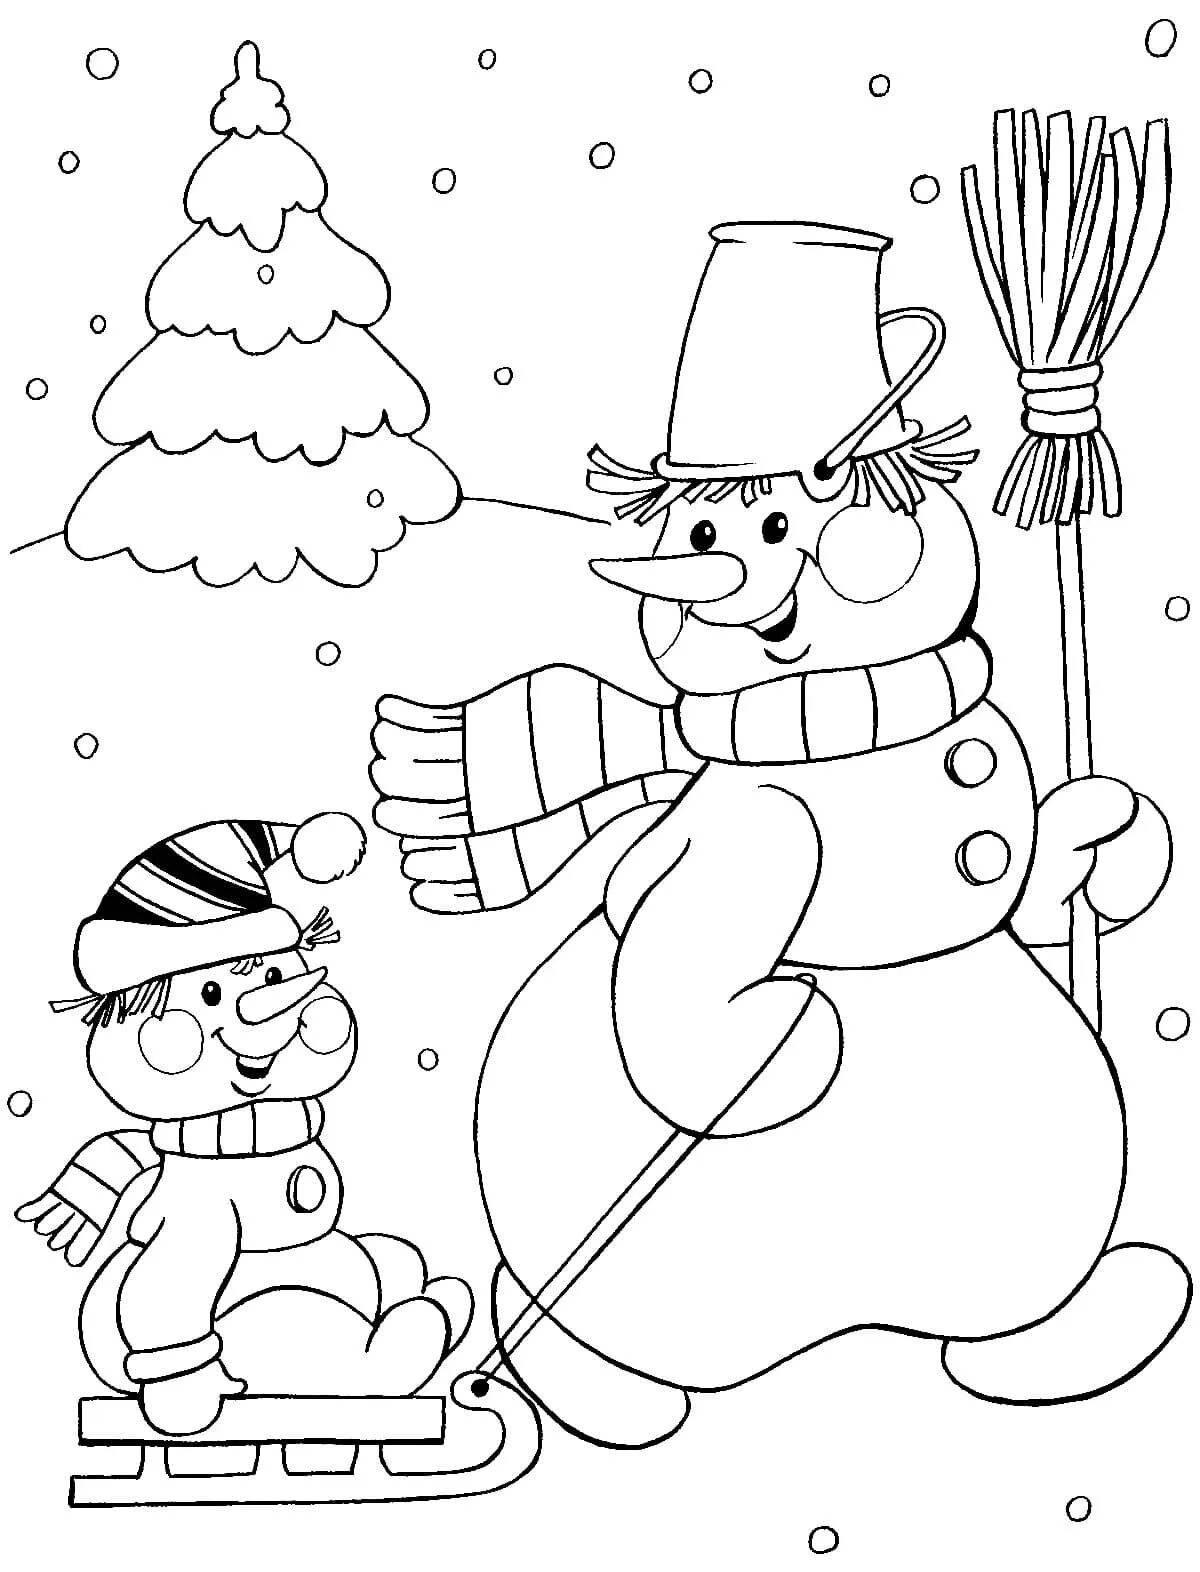 Great snowman drawing for kids